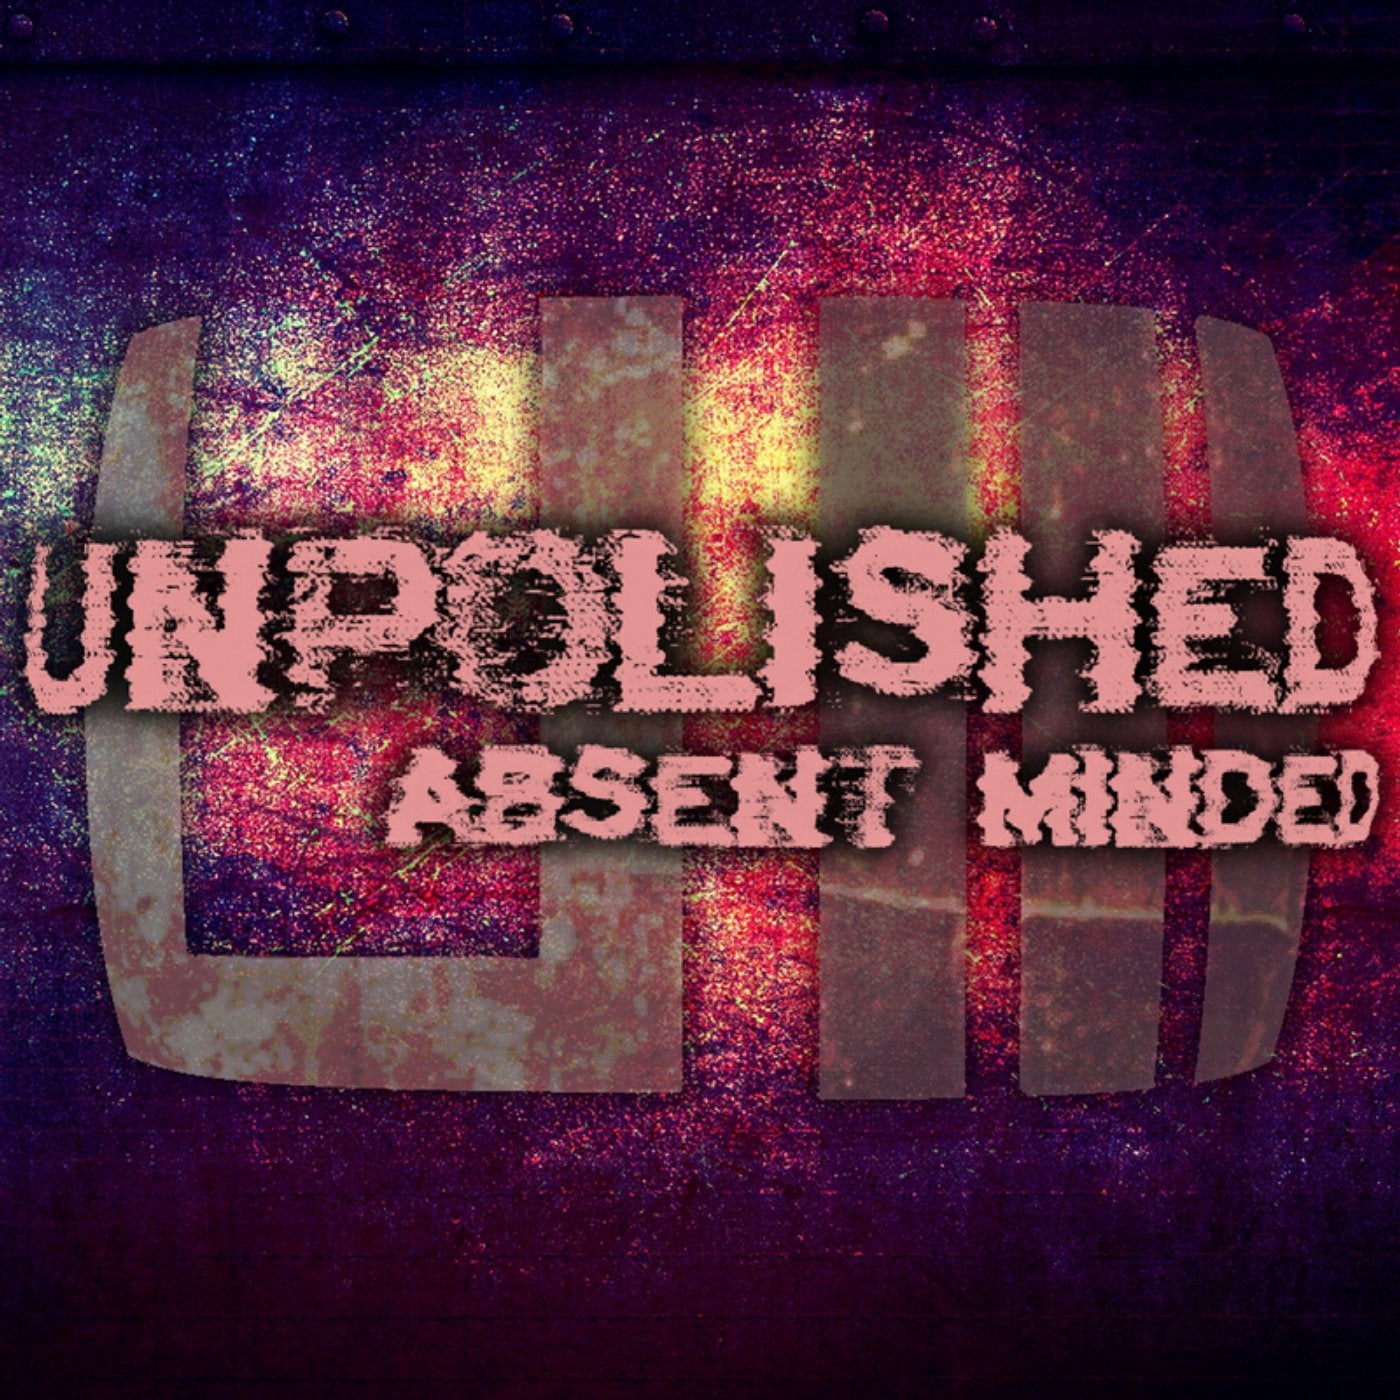 Absent Minded